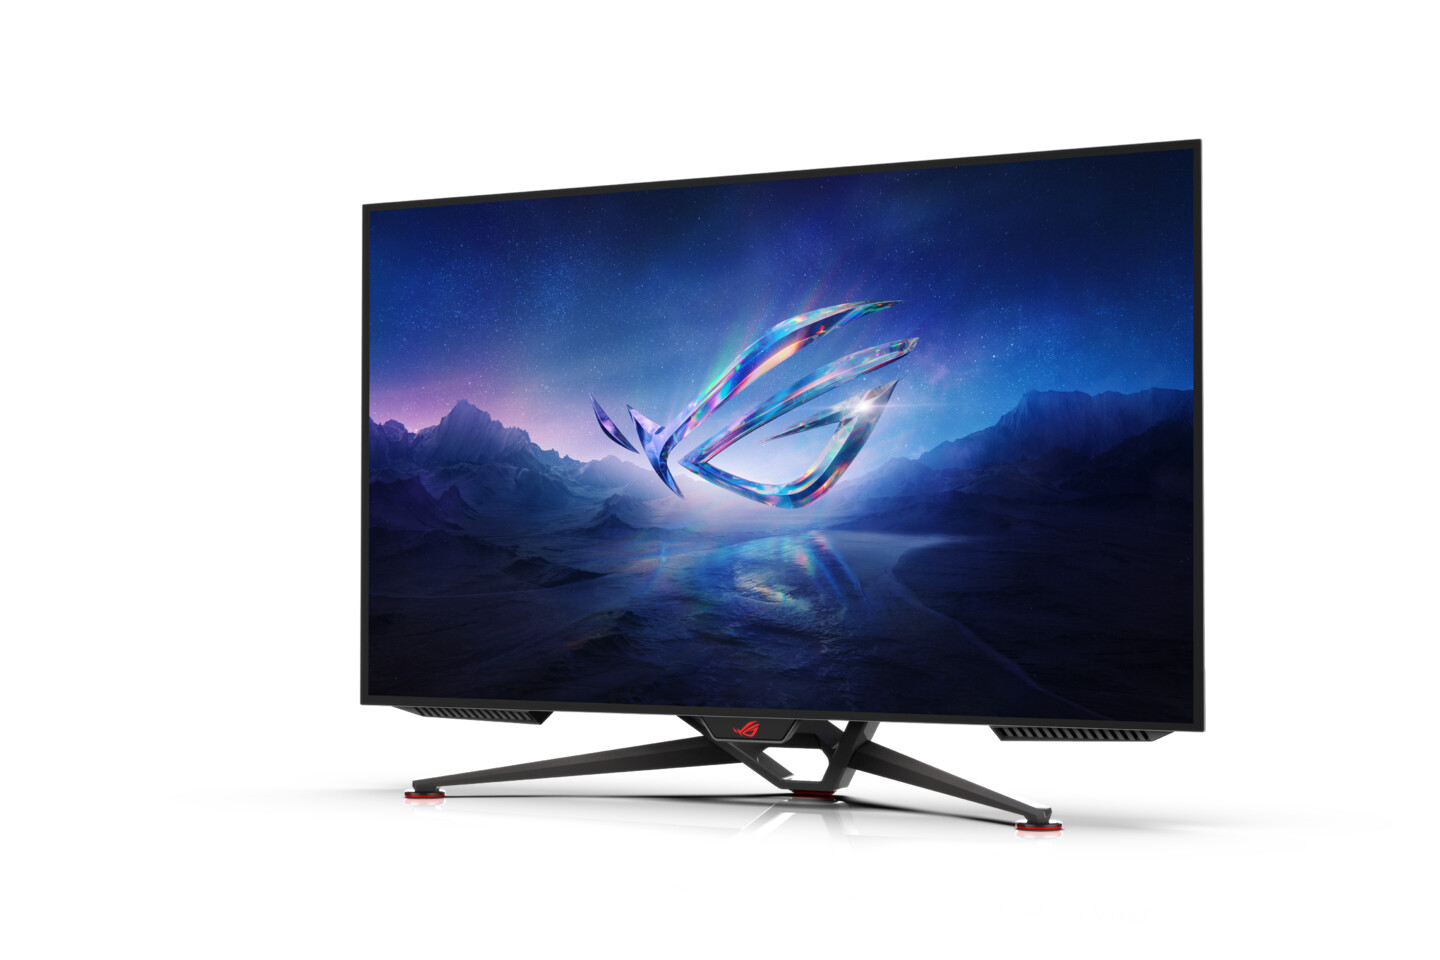 Gigabyte is announcing three gaming monitors with HDMI 2.1 and TV